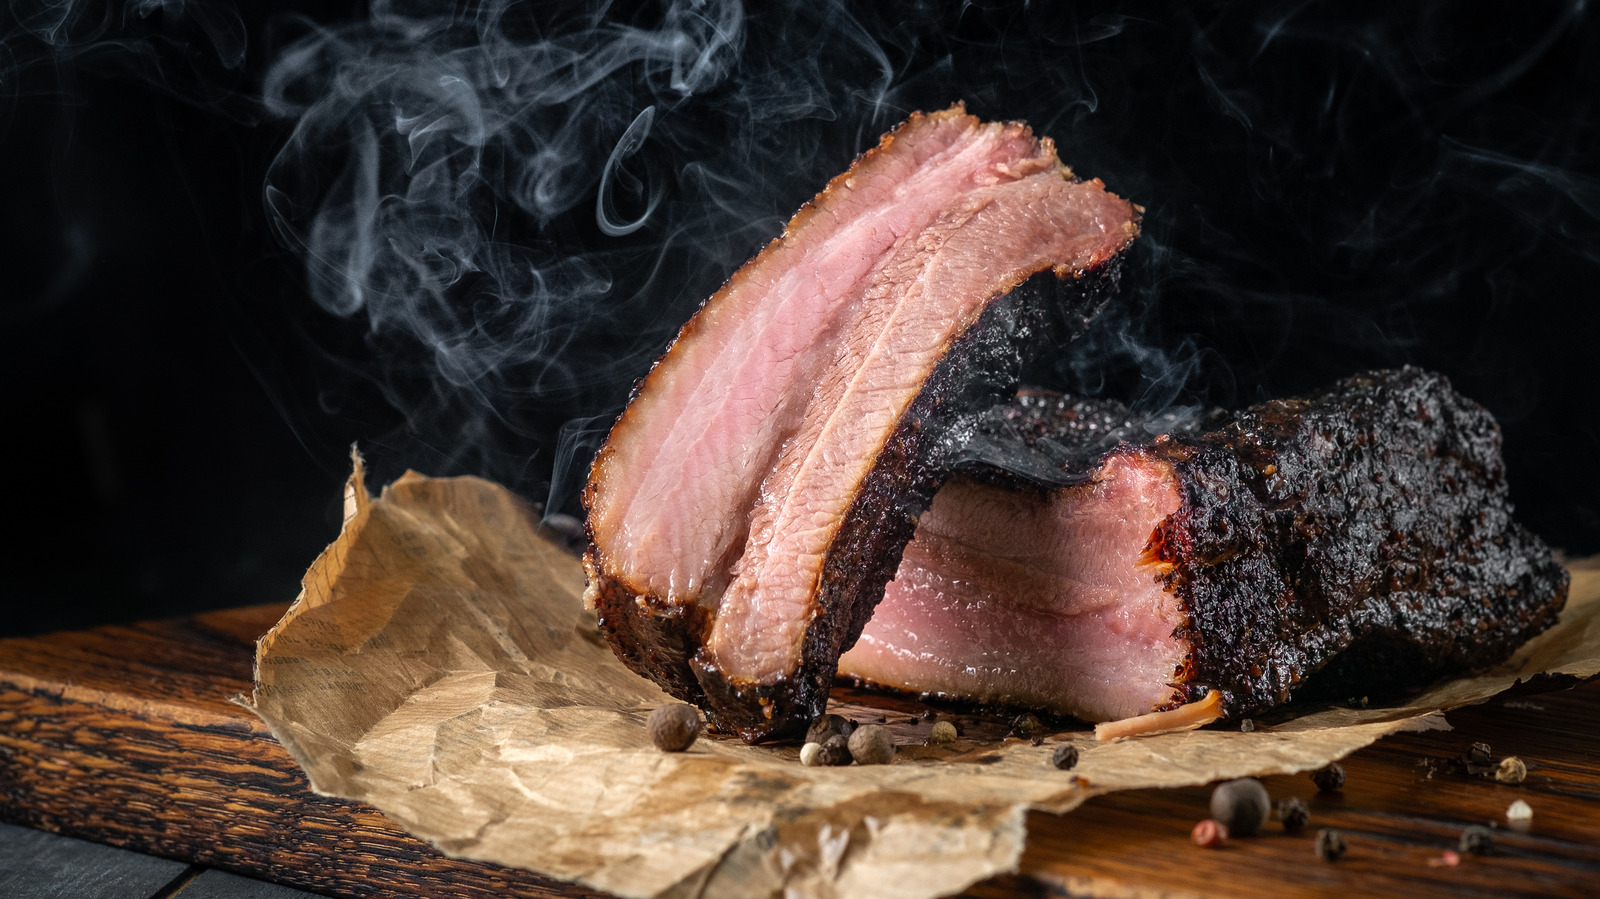 The Kentucky Derby Goes Through A Ridiculous Amount Of Brisket Every
Year